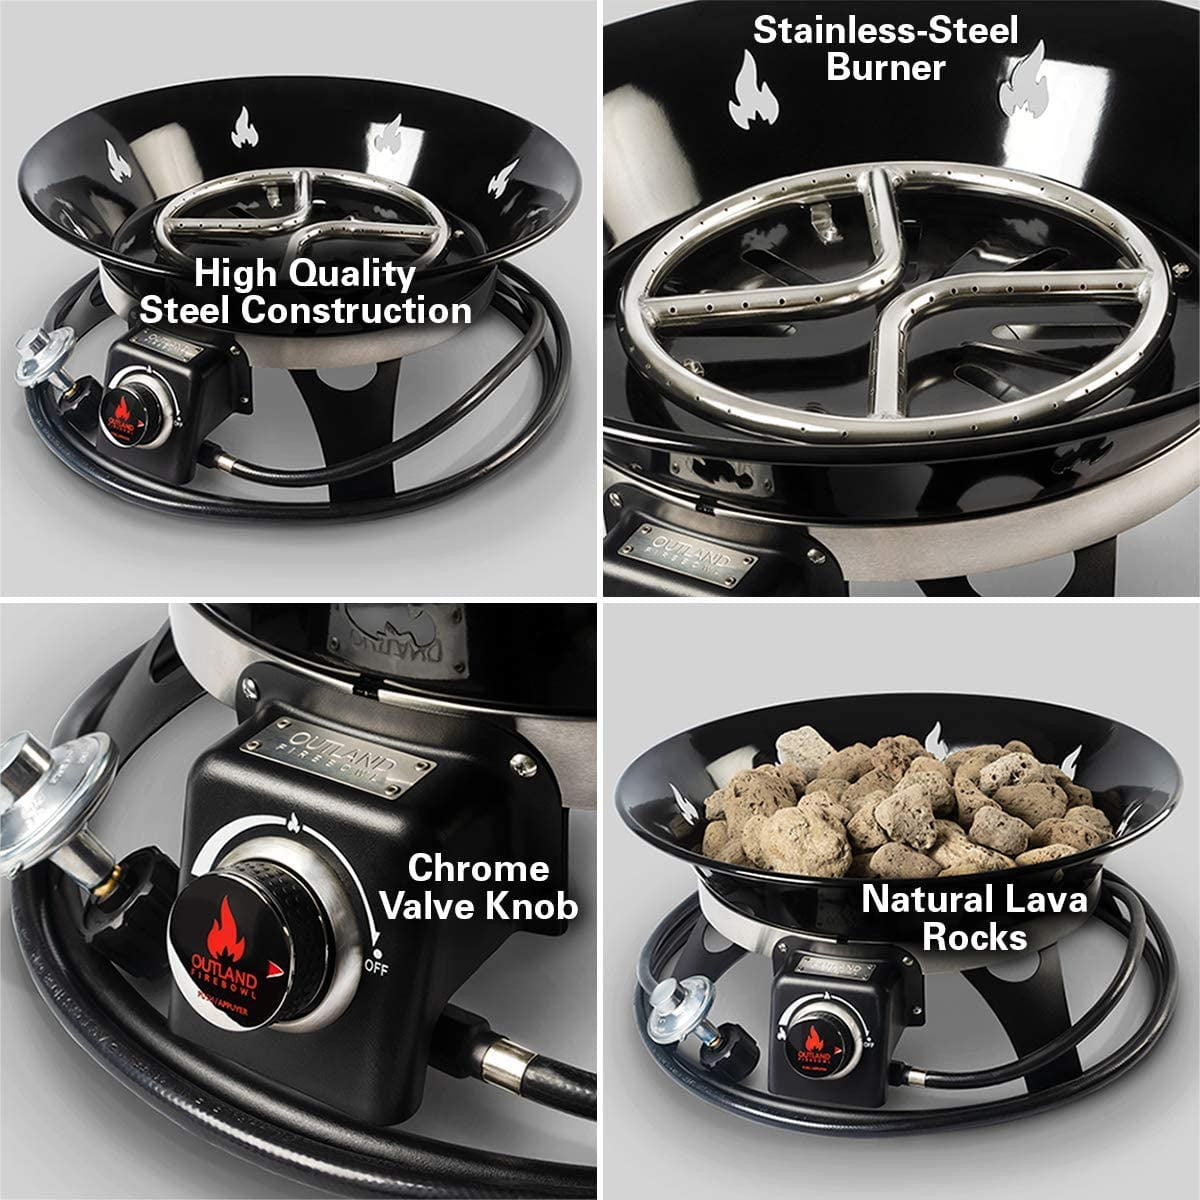 Outland Firebowl Natural Gas Conversion Kits for Specified Models of Portable Propane Fire Pits,Complete 3 Piece Set Quick & Easy Conversion 781 NGCK Manual for FMPPC2F-863 Cypress CSA Certified 